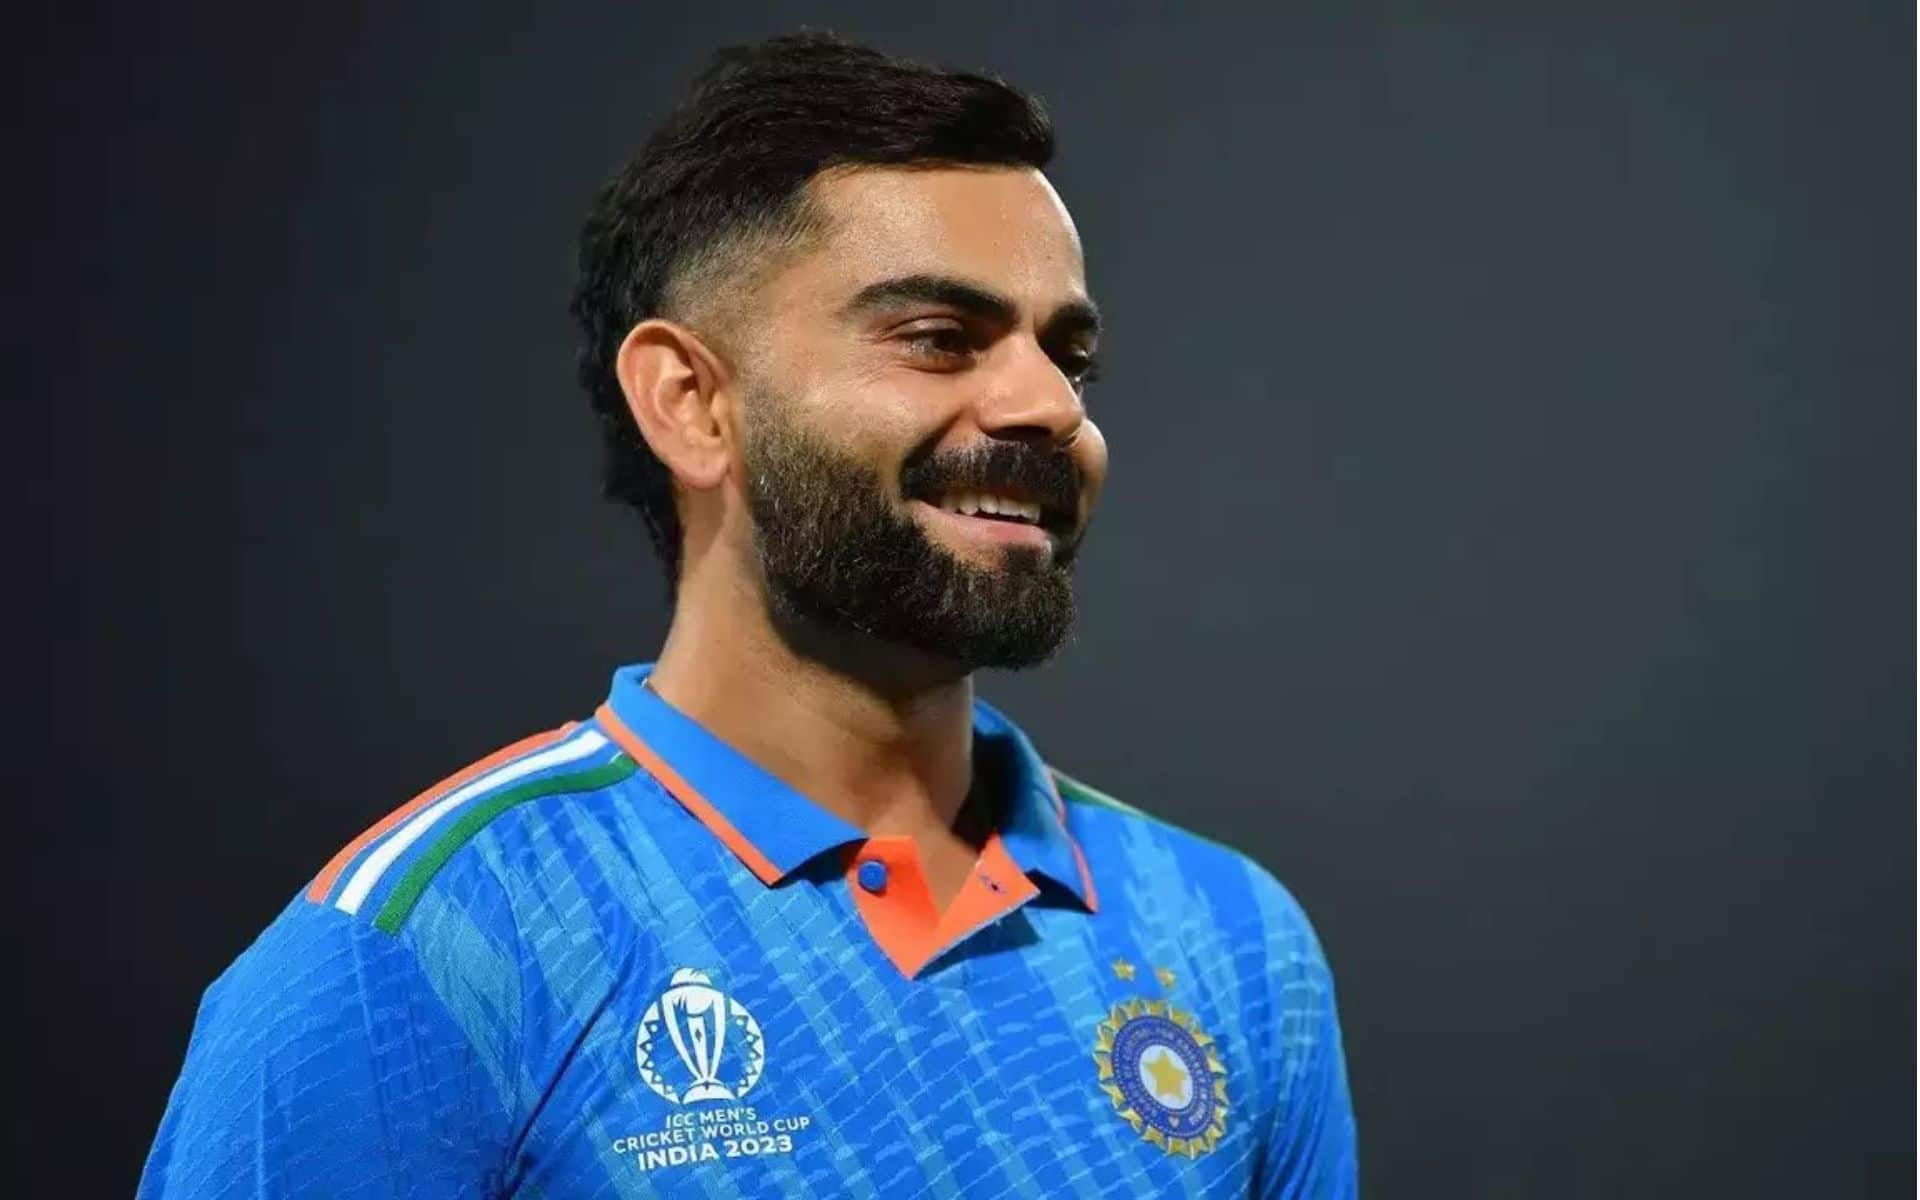 2023 - Virat Kohli sported a mullet during the ICC World Cup